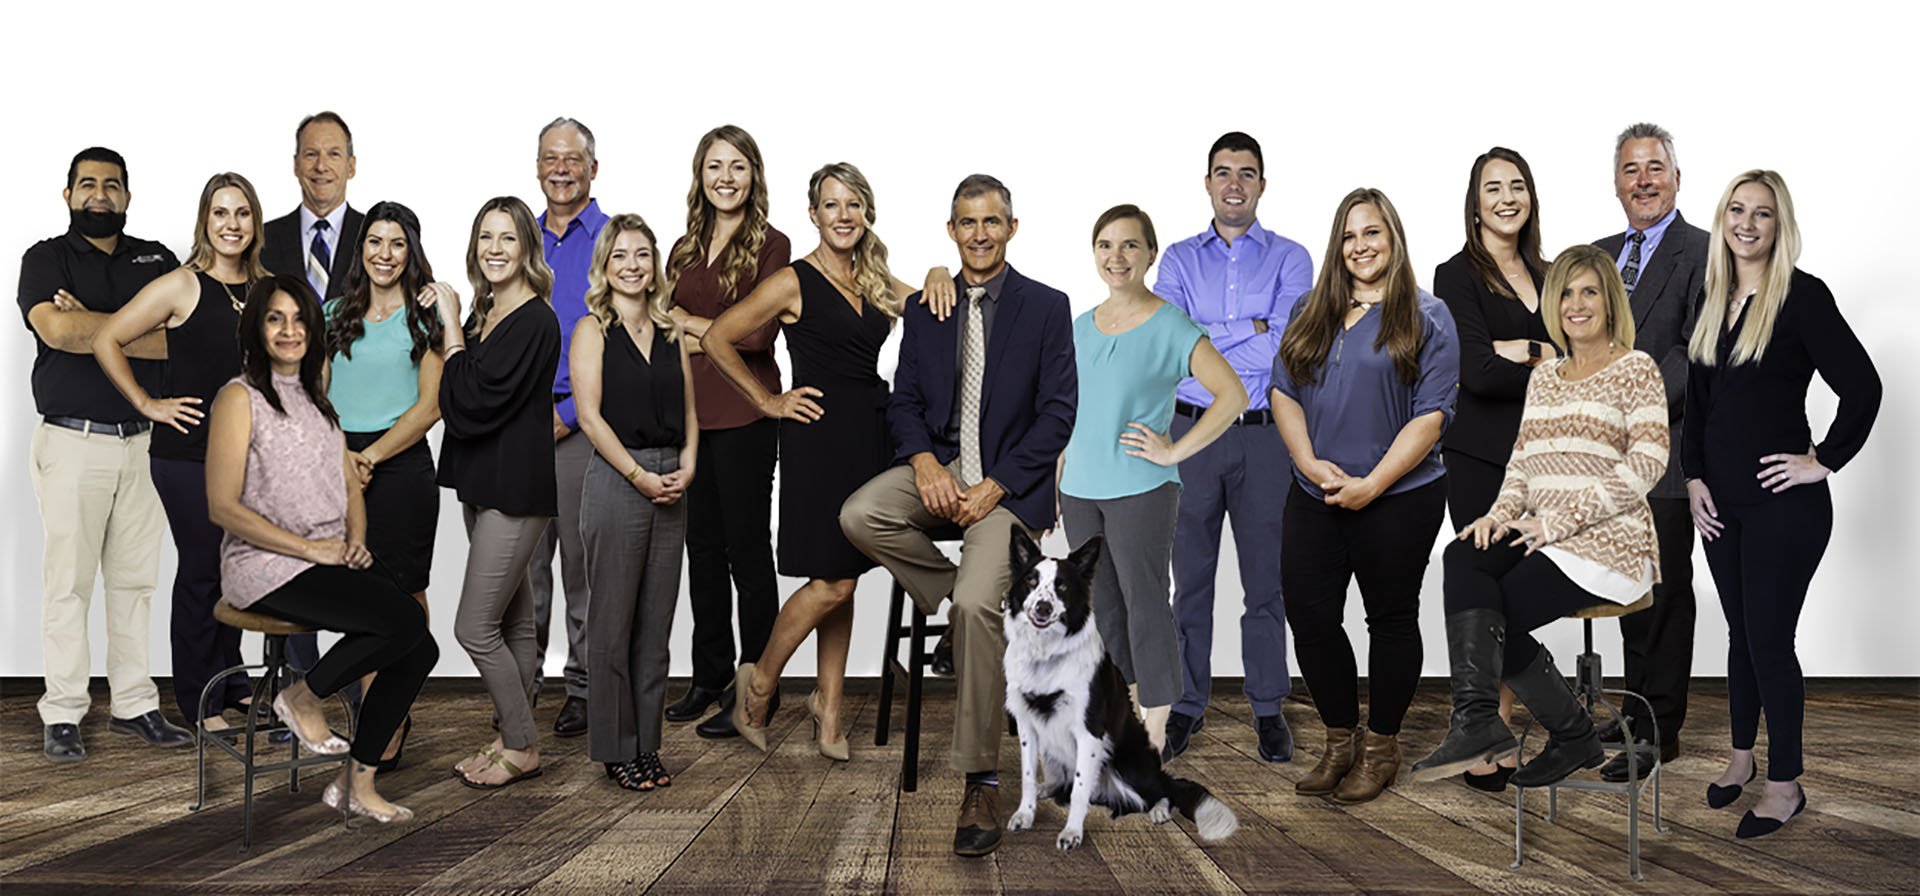 Homepage - View of Smiling Heritage Insurance Agency Team